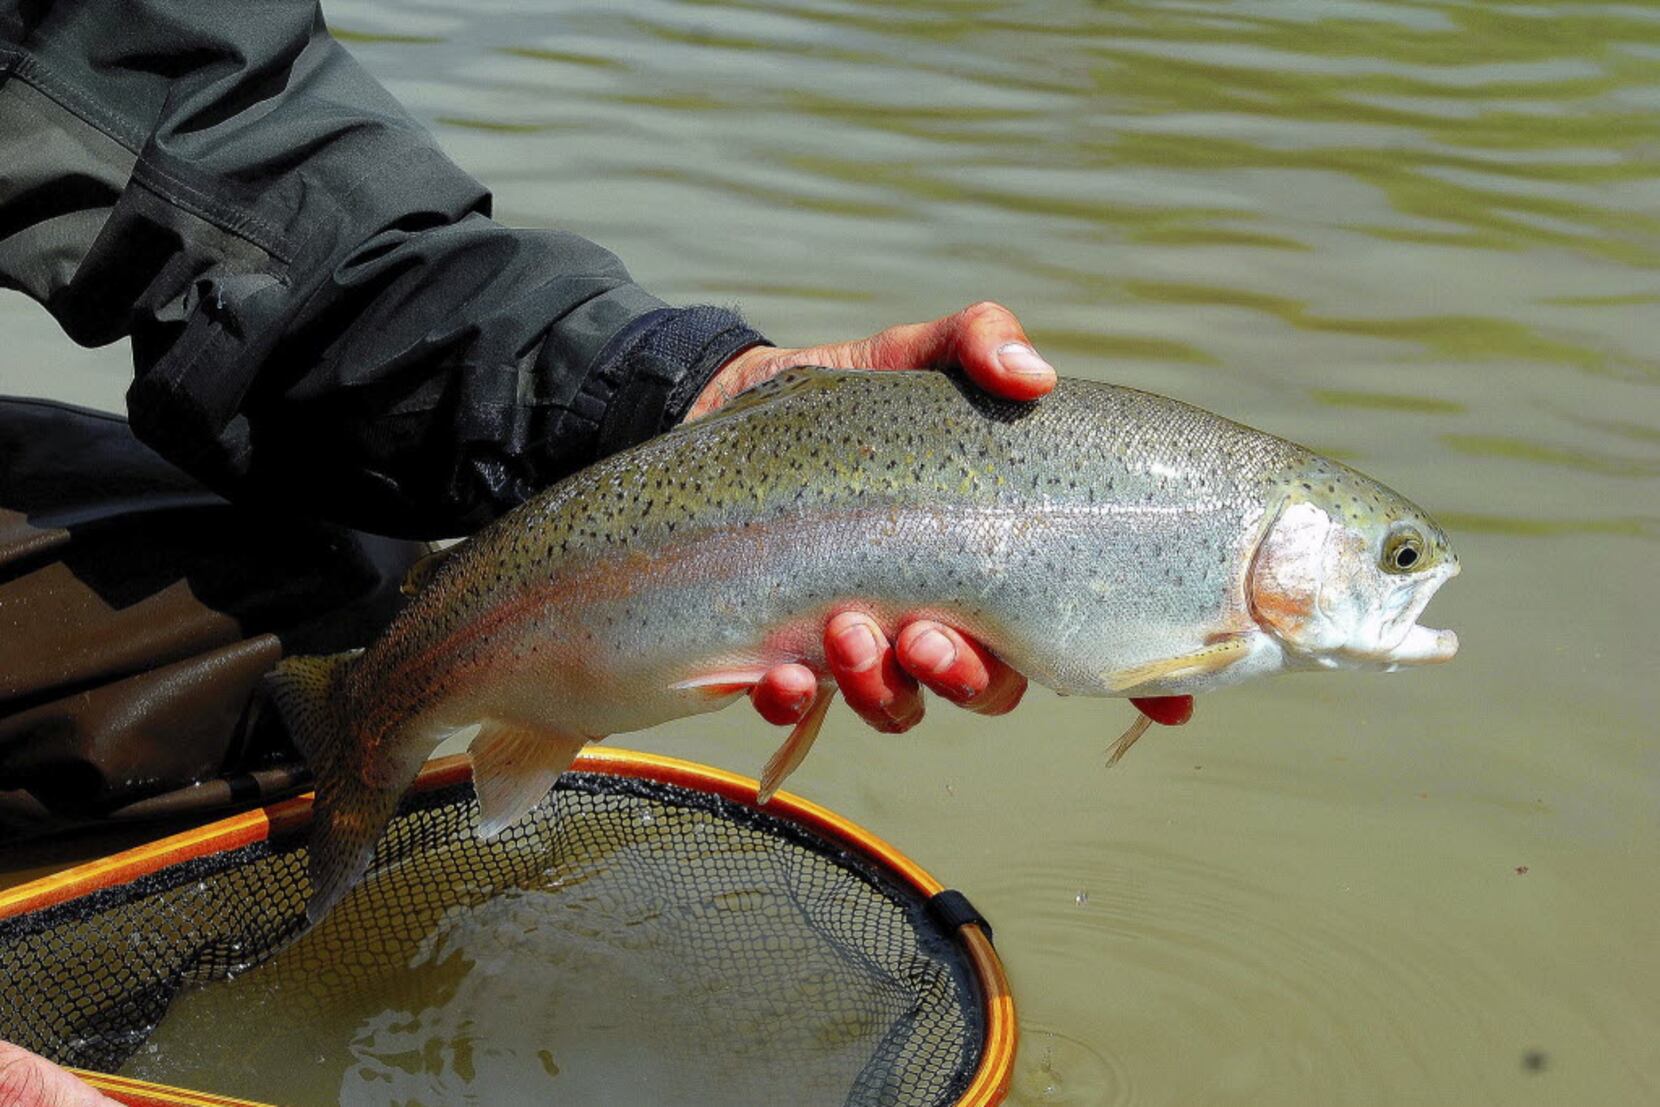 Outdoors notebook: Trout fishing brings them to the Guadalupe